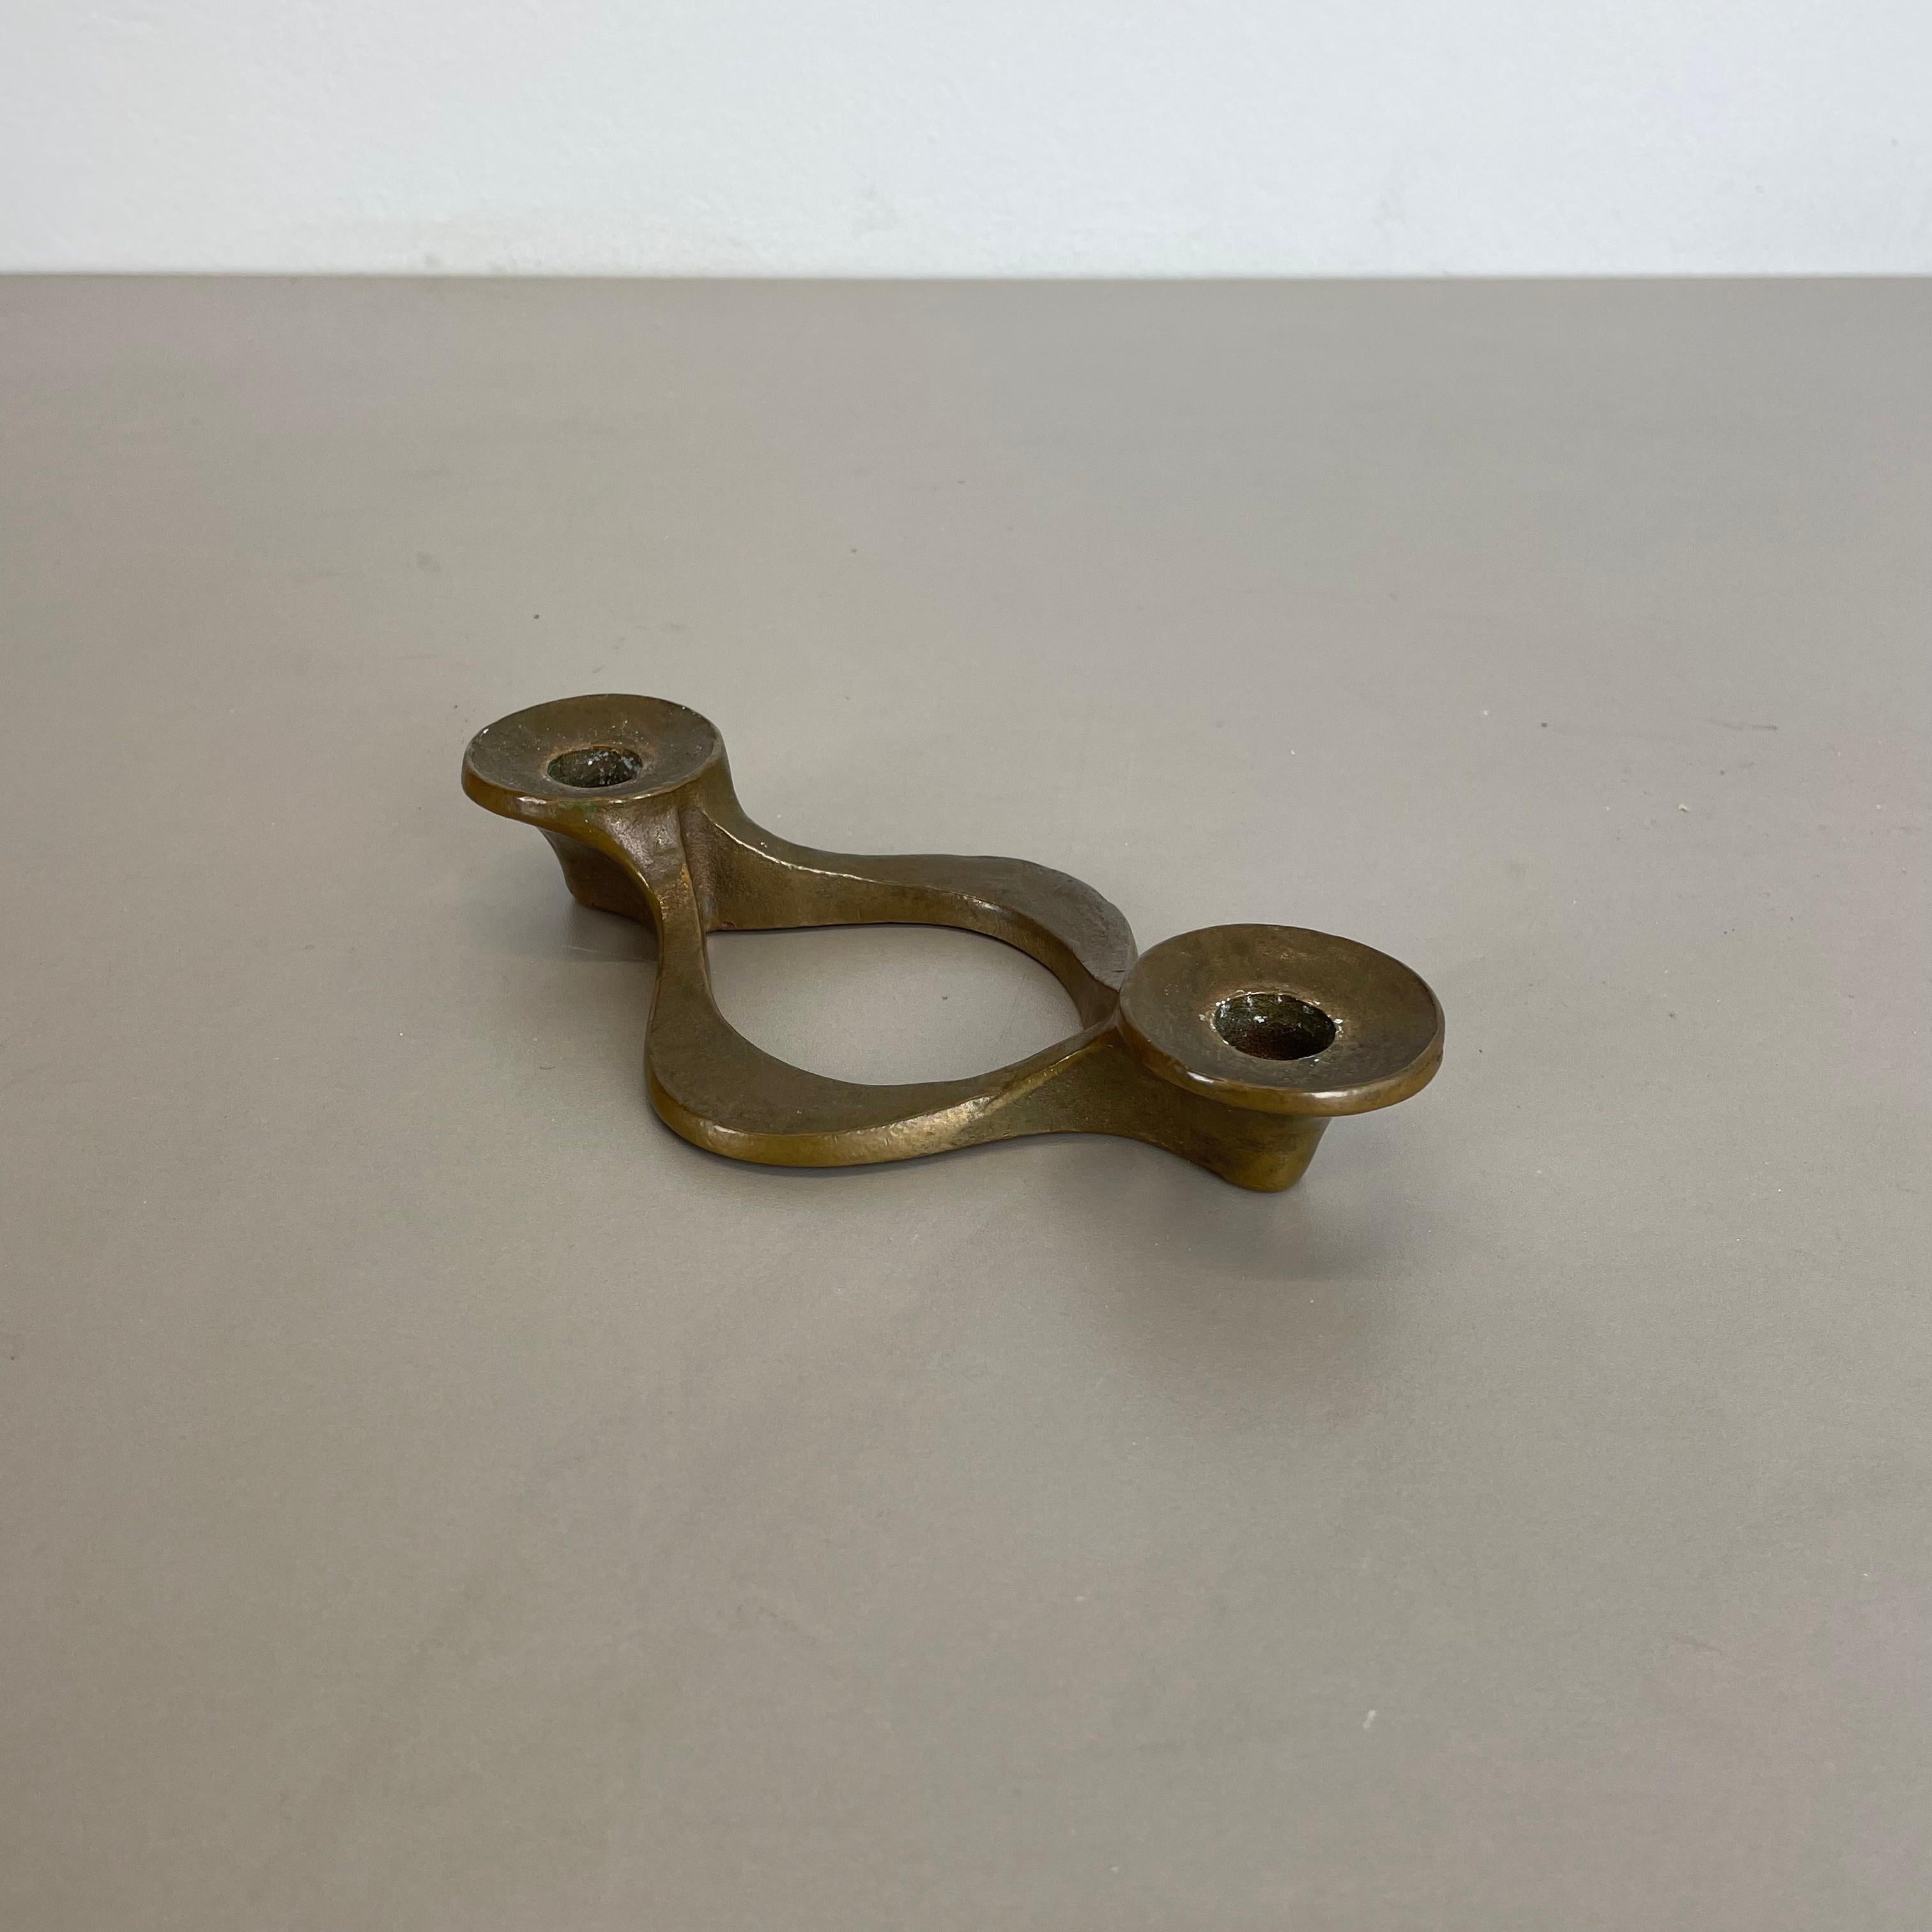 Article: Brutalist candleholder

Origin: Germany

Design producer: Michael Harjes

Material: bronze

Decade: 1960s

Description: This original vintage candleholder was produced in the 1960s in Germany. Designed and executed by Michael